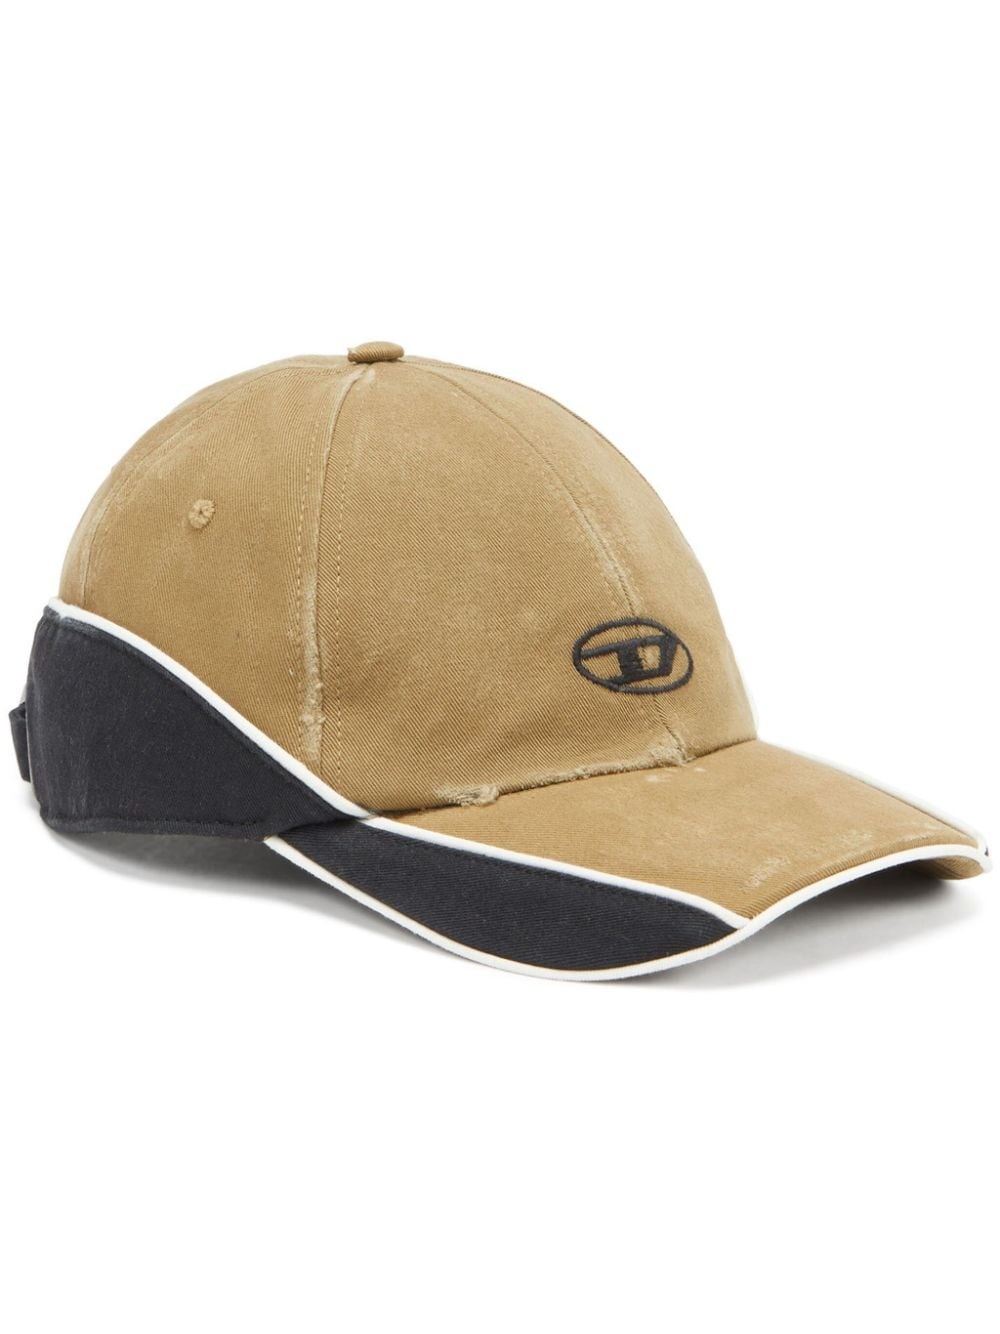 C-DALE logo-embroidered cap - 1